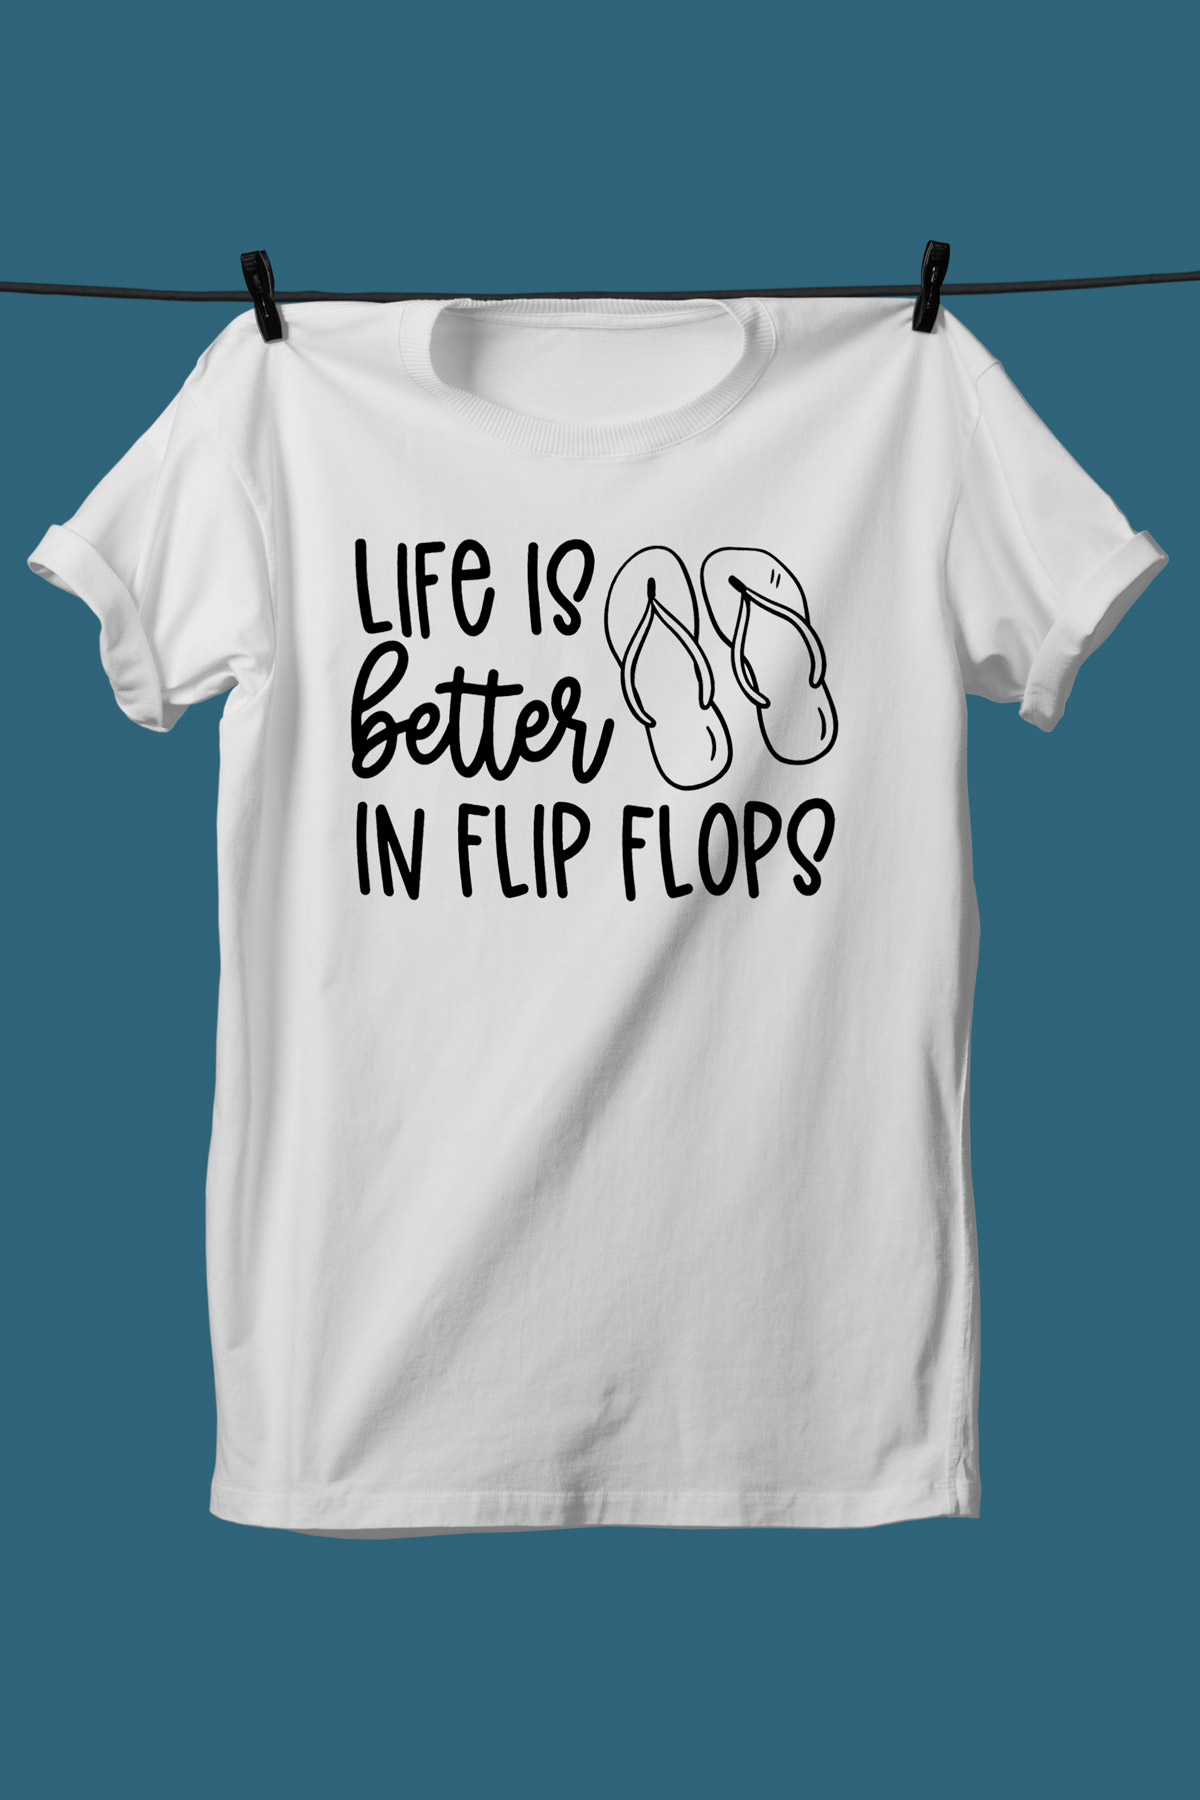 This image shows one of the SVGs from the free summer SVG set on a white tshirt. This one says life is better in flip flops with an image of flip flops.